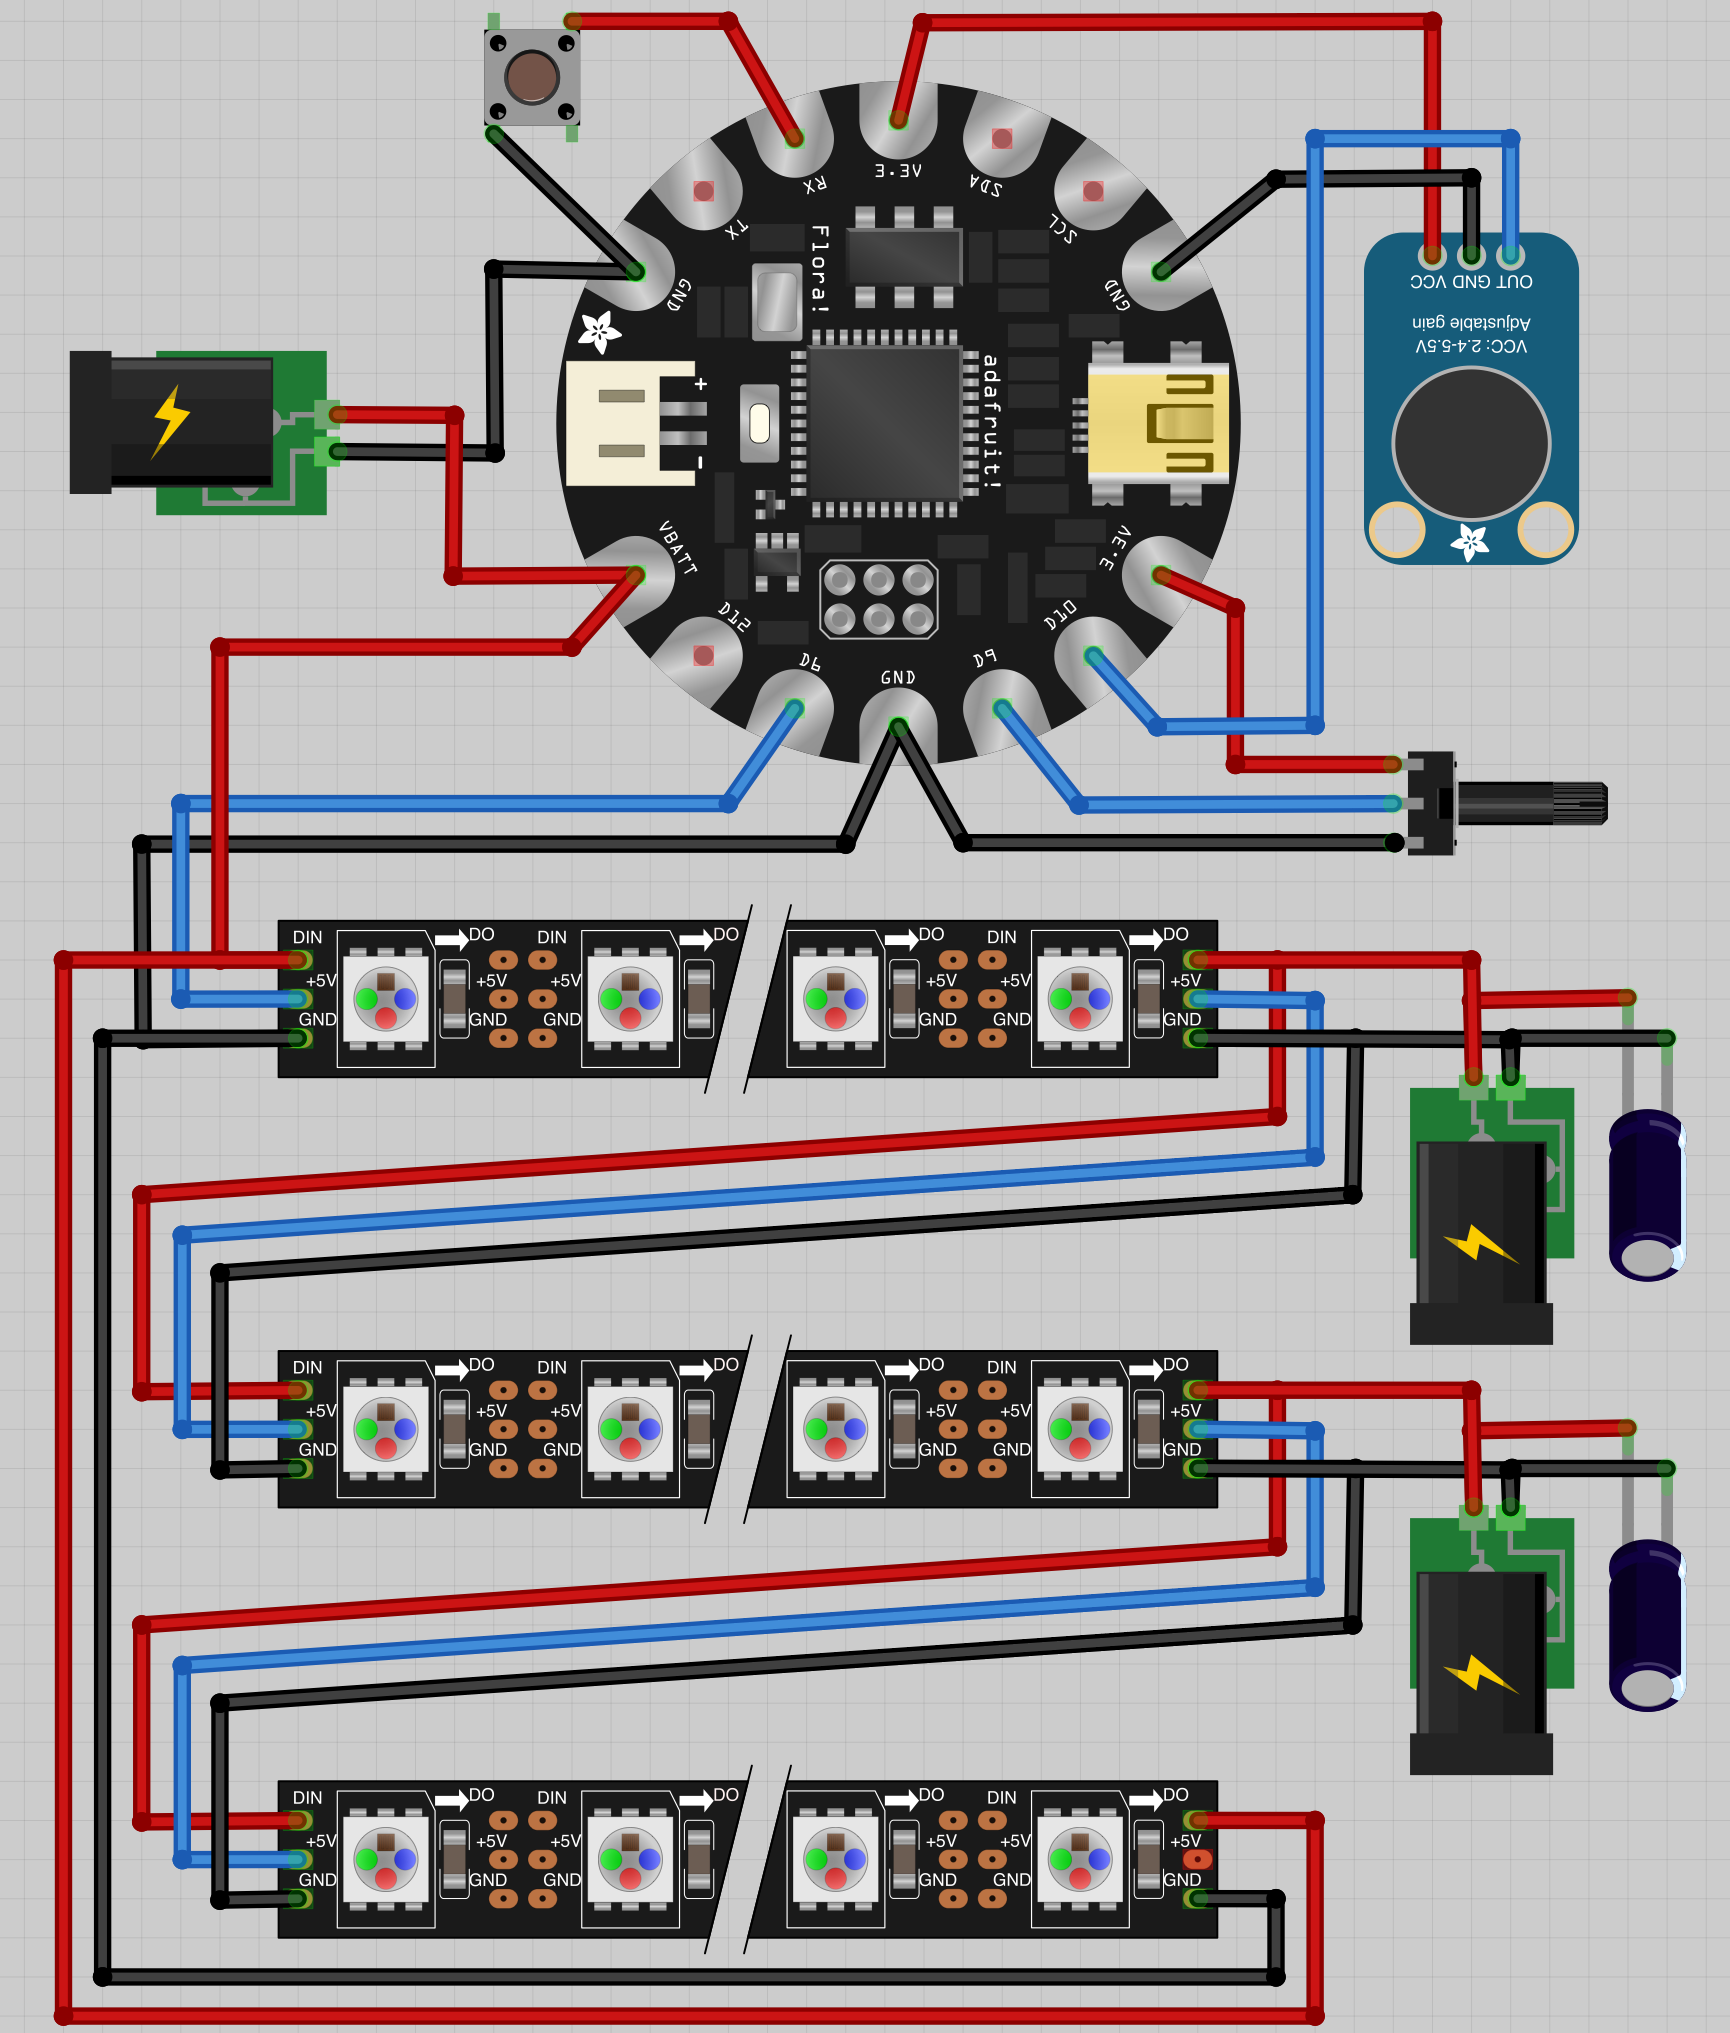 Room lights diagram. Note the NeoPixels image has the data and +5V switched. The data is actually between the ground and voltage.